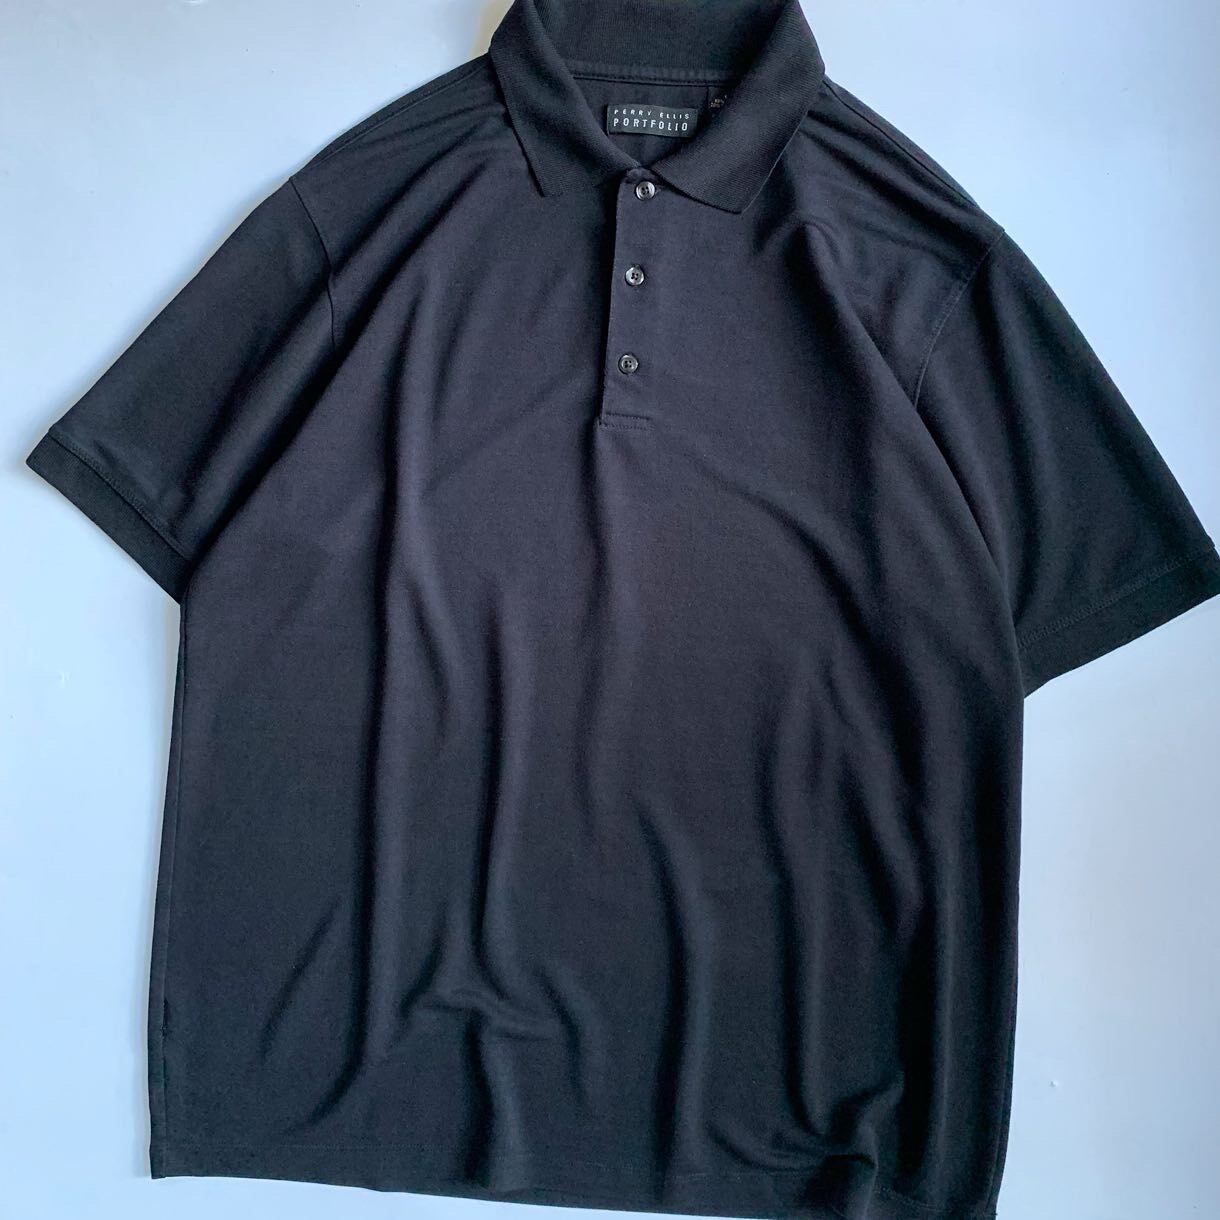 PERRY ELLIS polo shirt | ON THE HILL